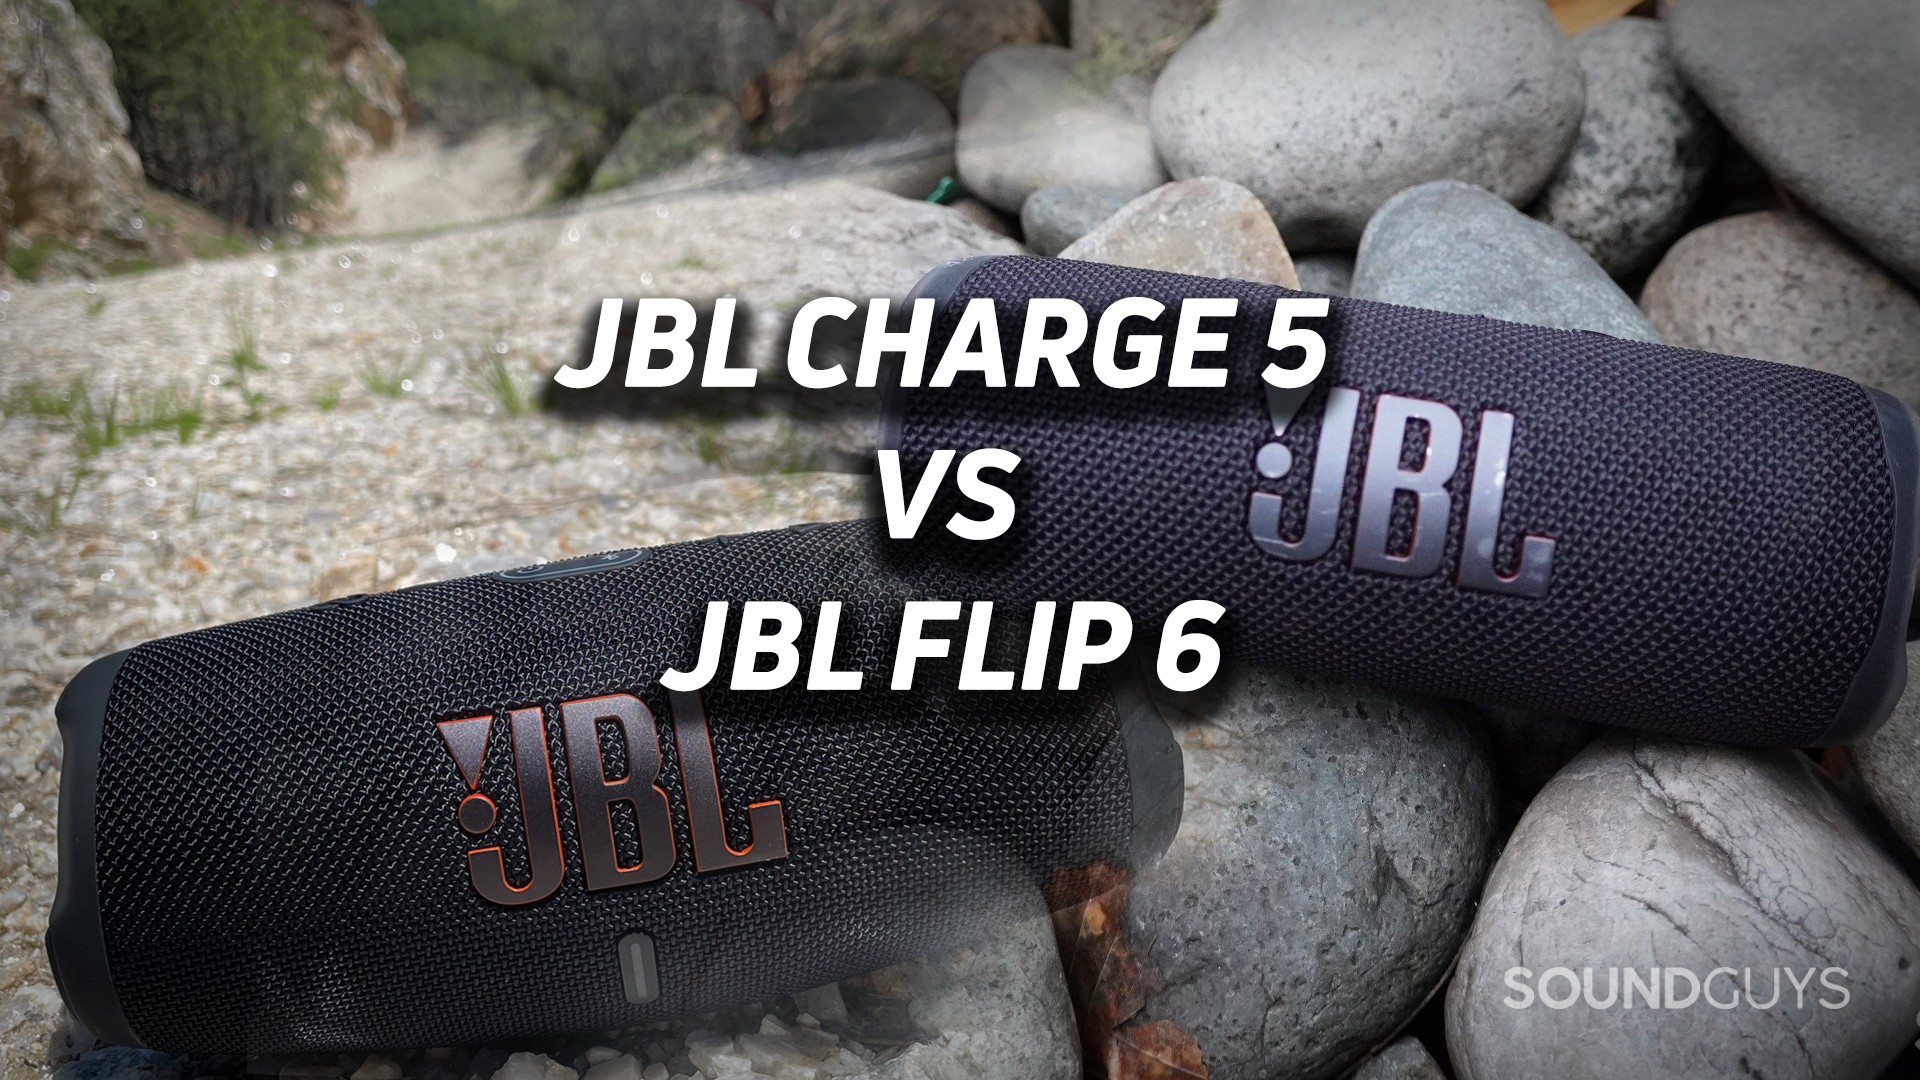 Two overlaid images show the JBL Charge 5 on the left and JBL Flip 6 on the right with text. They're on rocks.